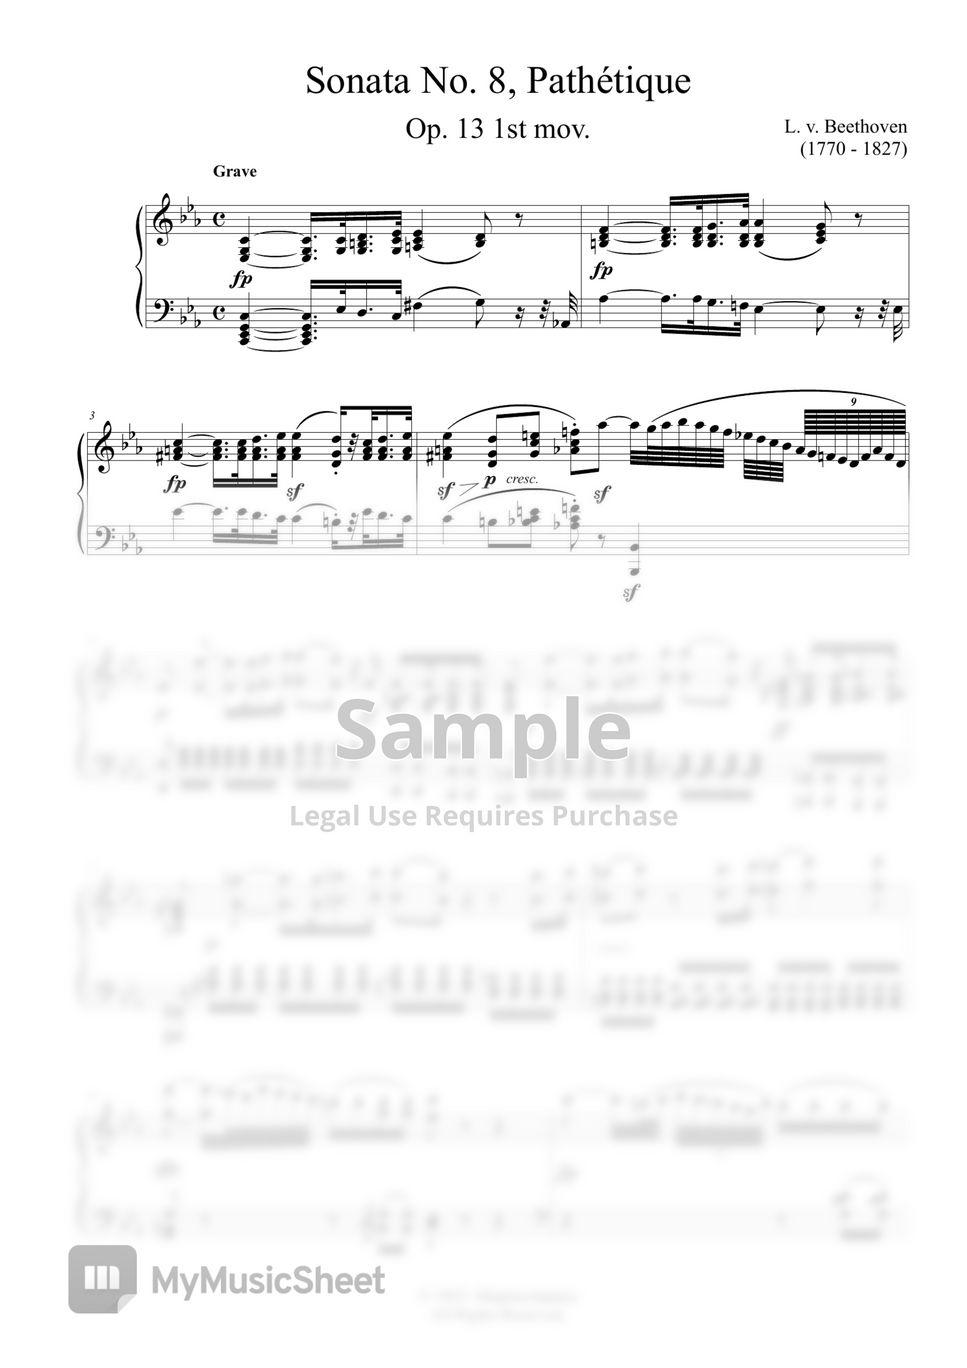 L.V.Beethoven - Pathetique Beethoven 1st movement by MyMusicSheet Official